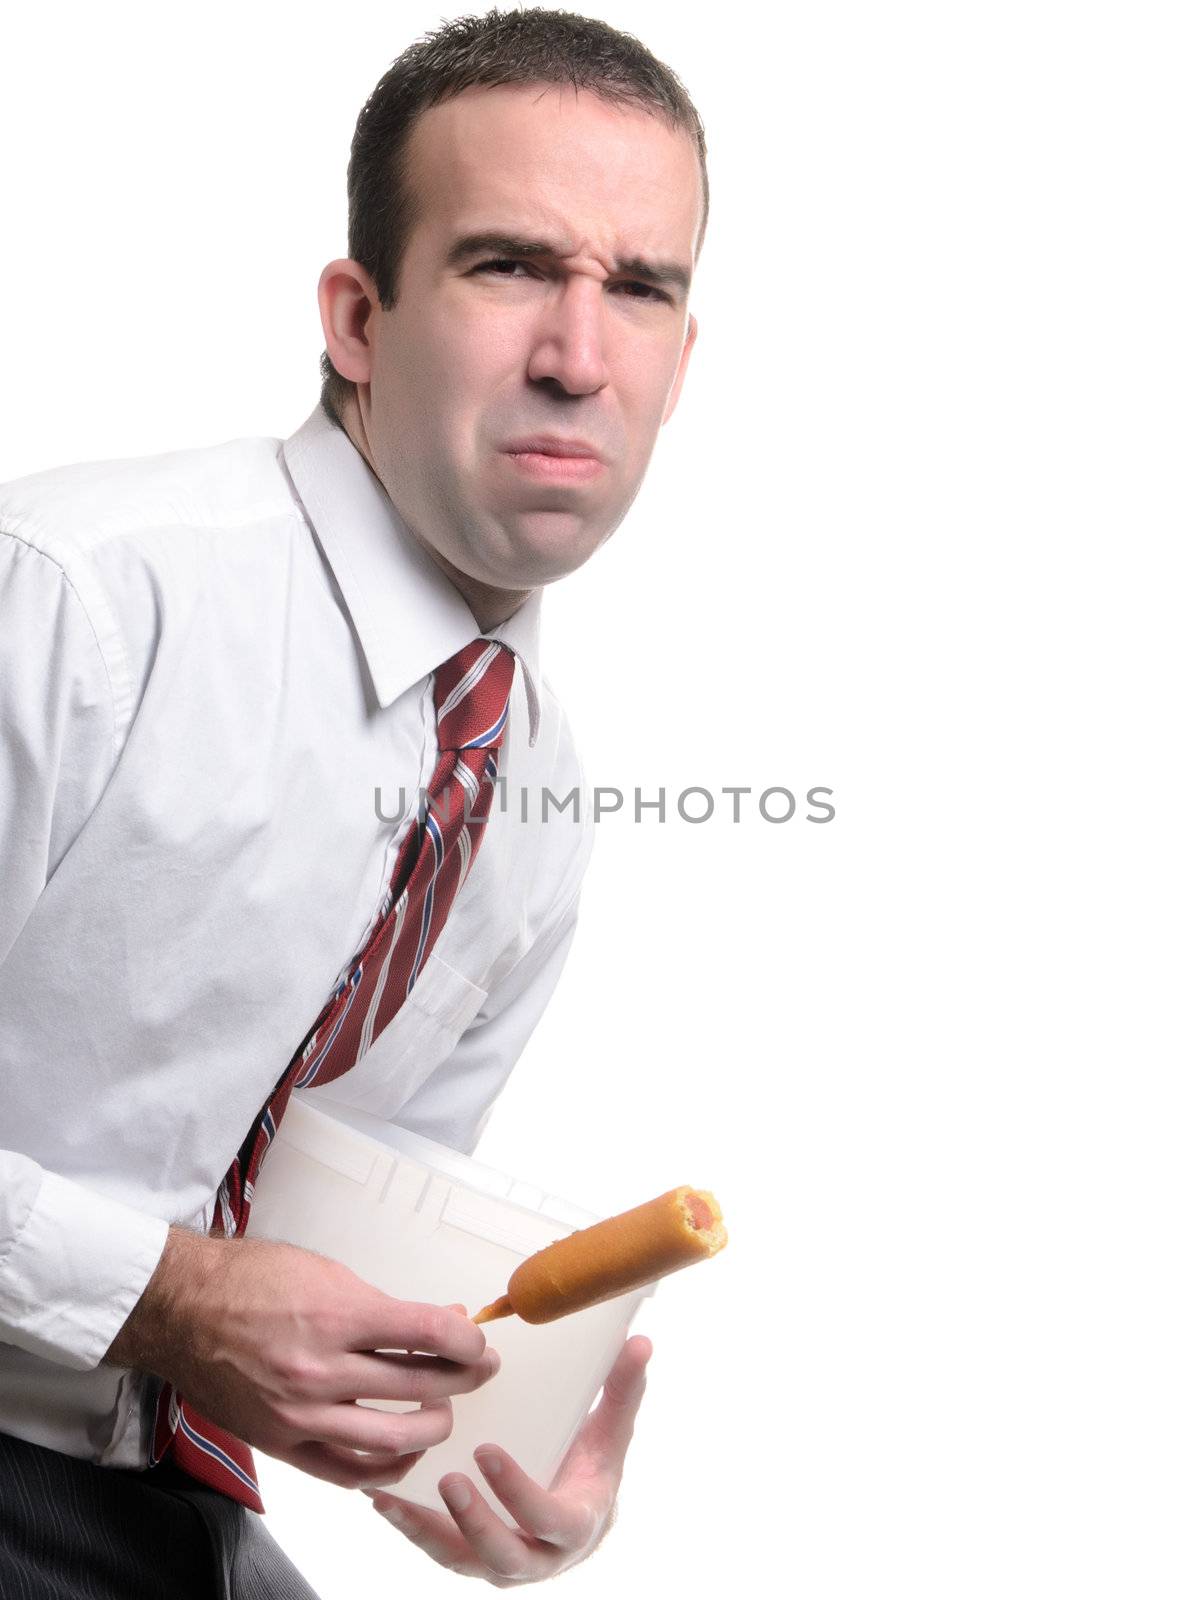 A young man with a stomach ache due to eating spoiled food, isolated against a white background.